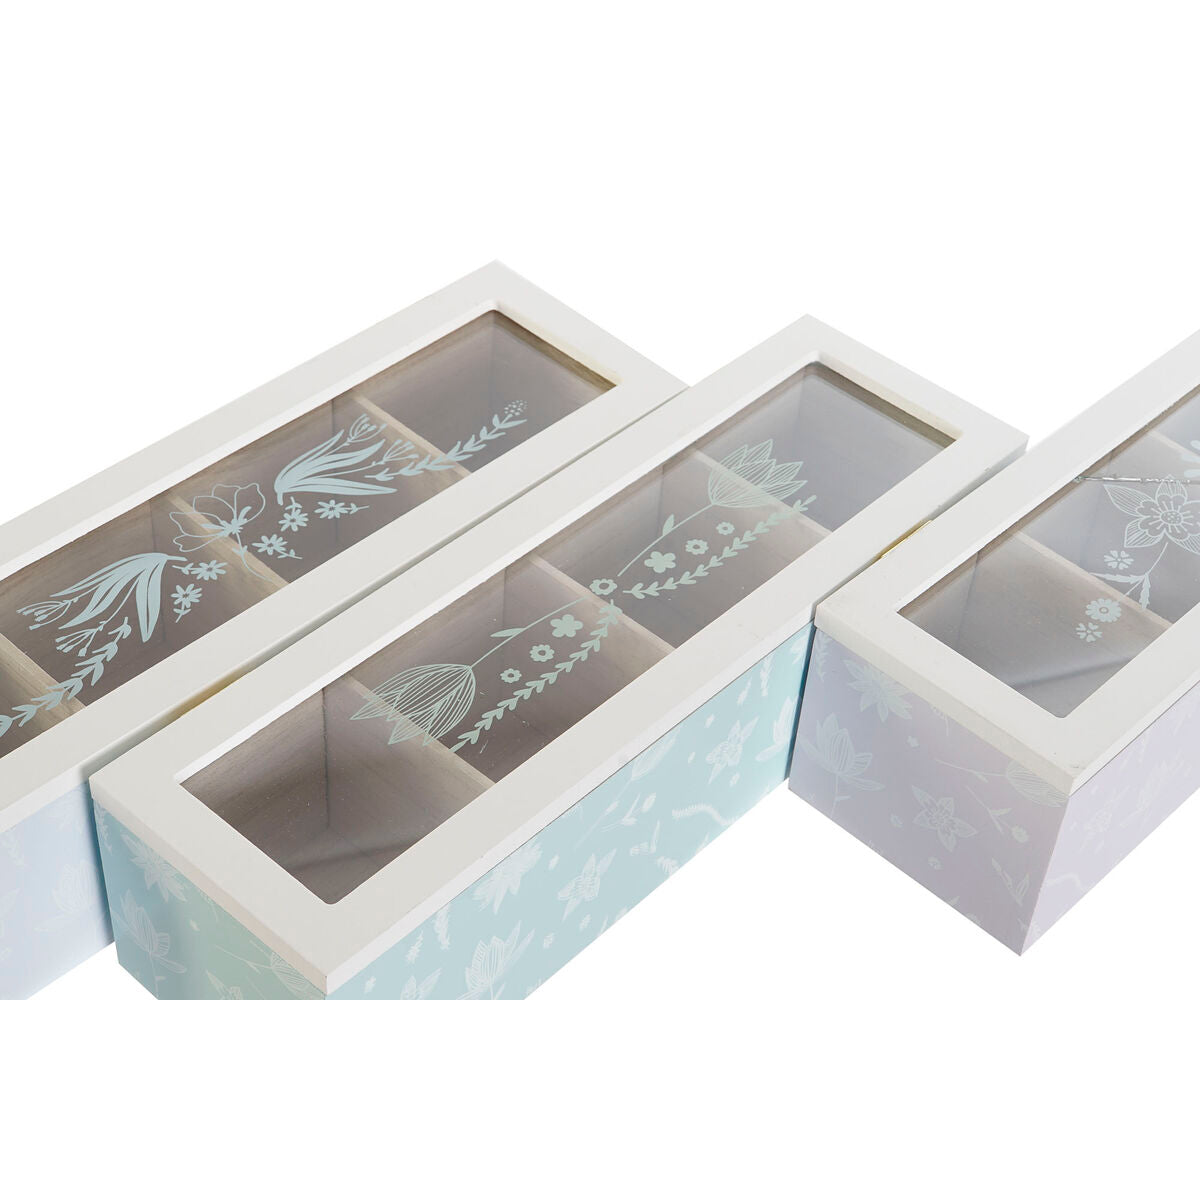 Box for Infusions DKD Home Decor Blauw Groen Lila Kristal Hout MDF (3 Stuks)